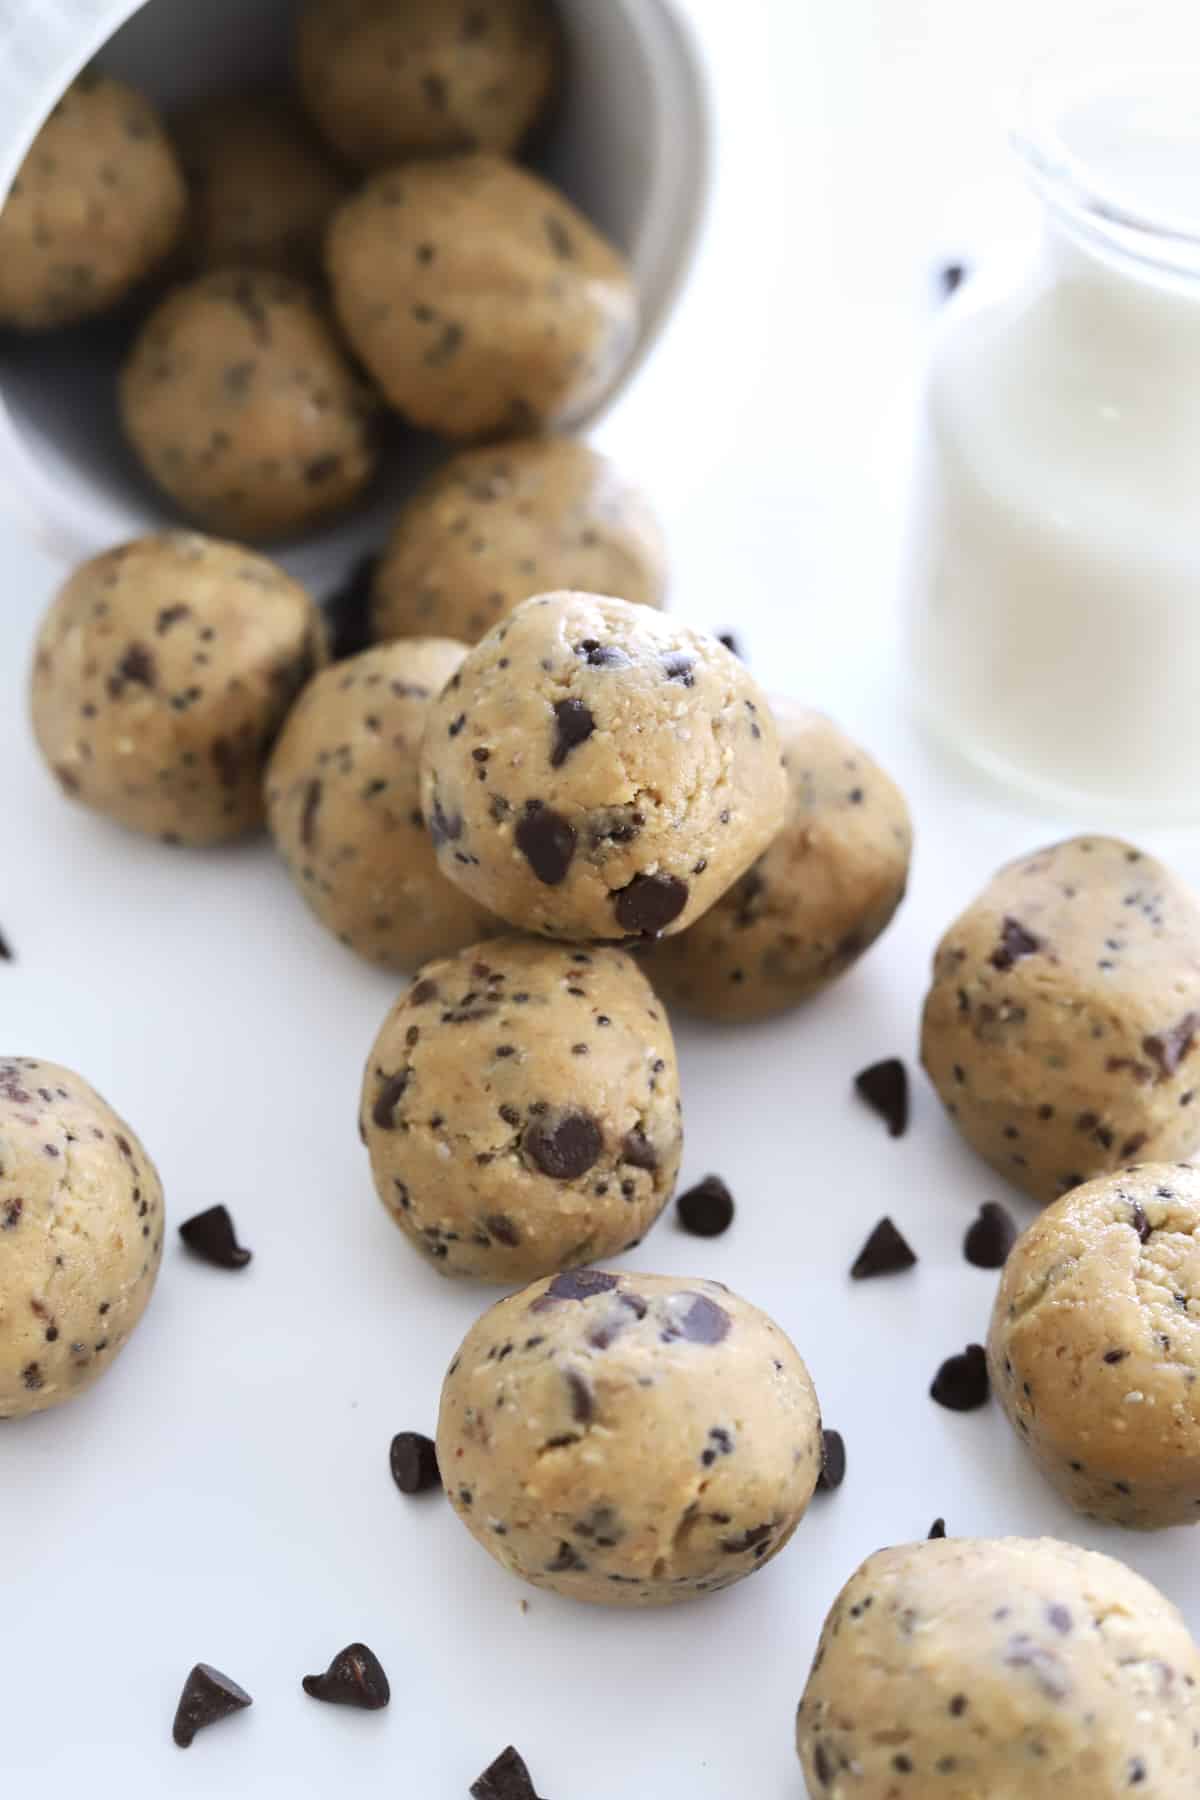 peanut butter energy balls spilling out of a cup with chocolate chips.